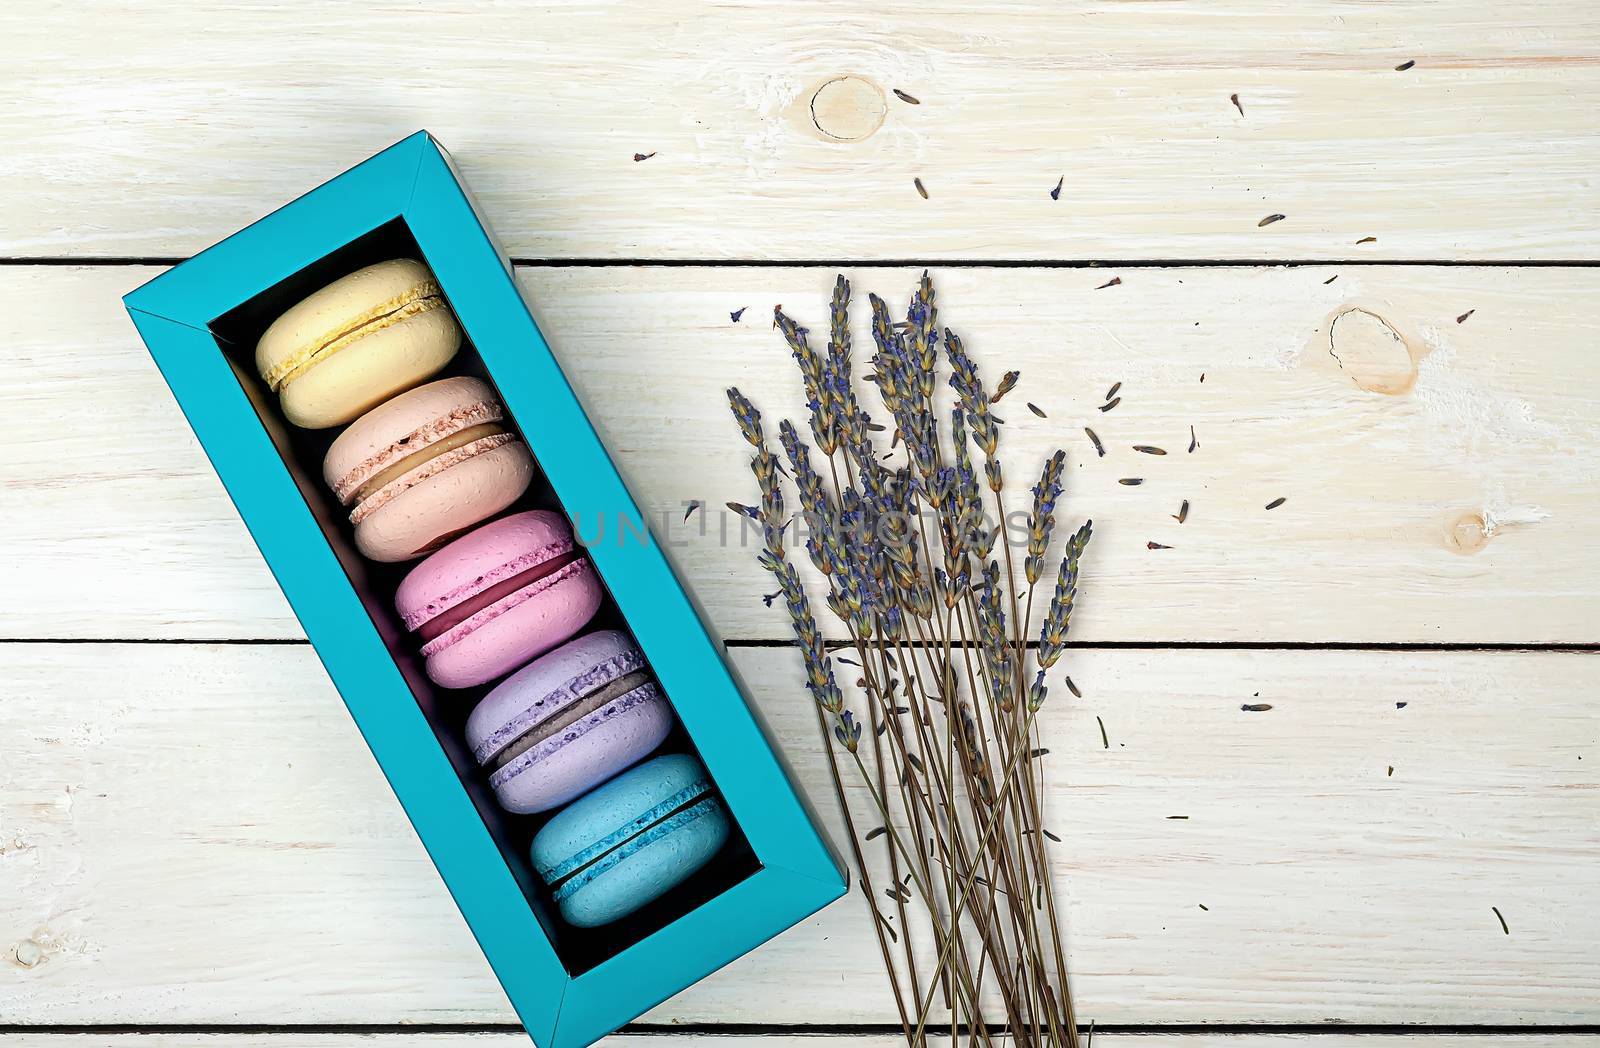 Macaroons in gift box next to lavender on wooden background